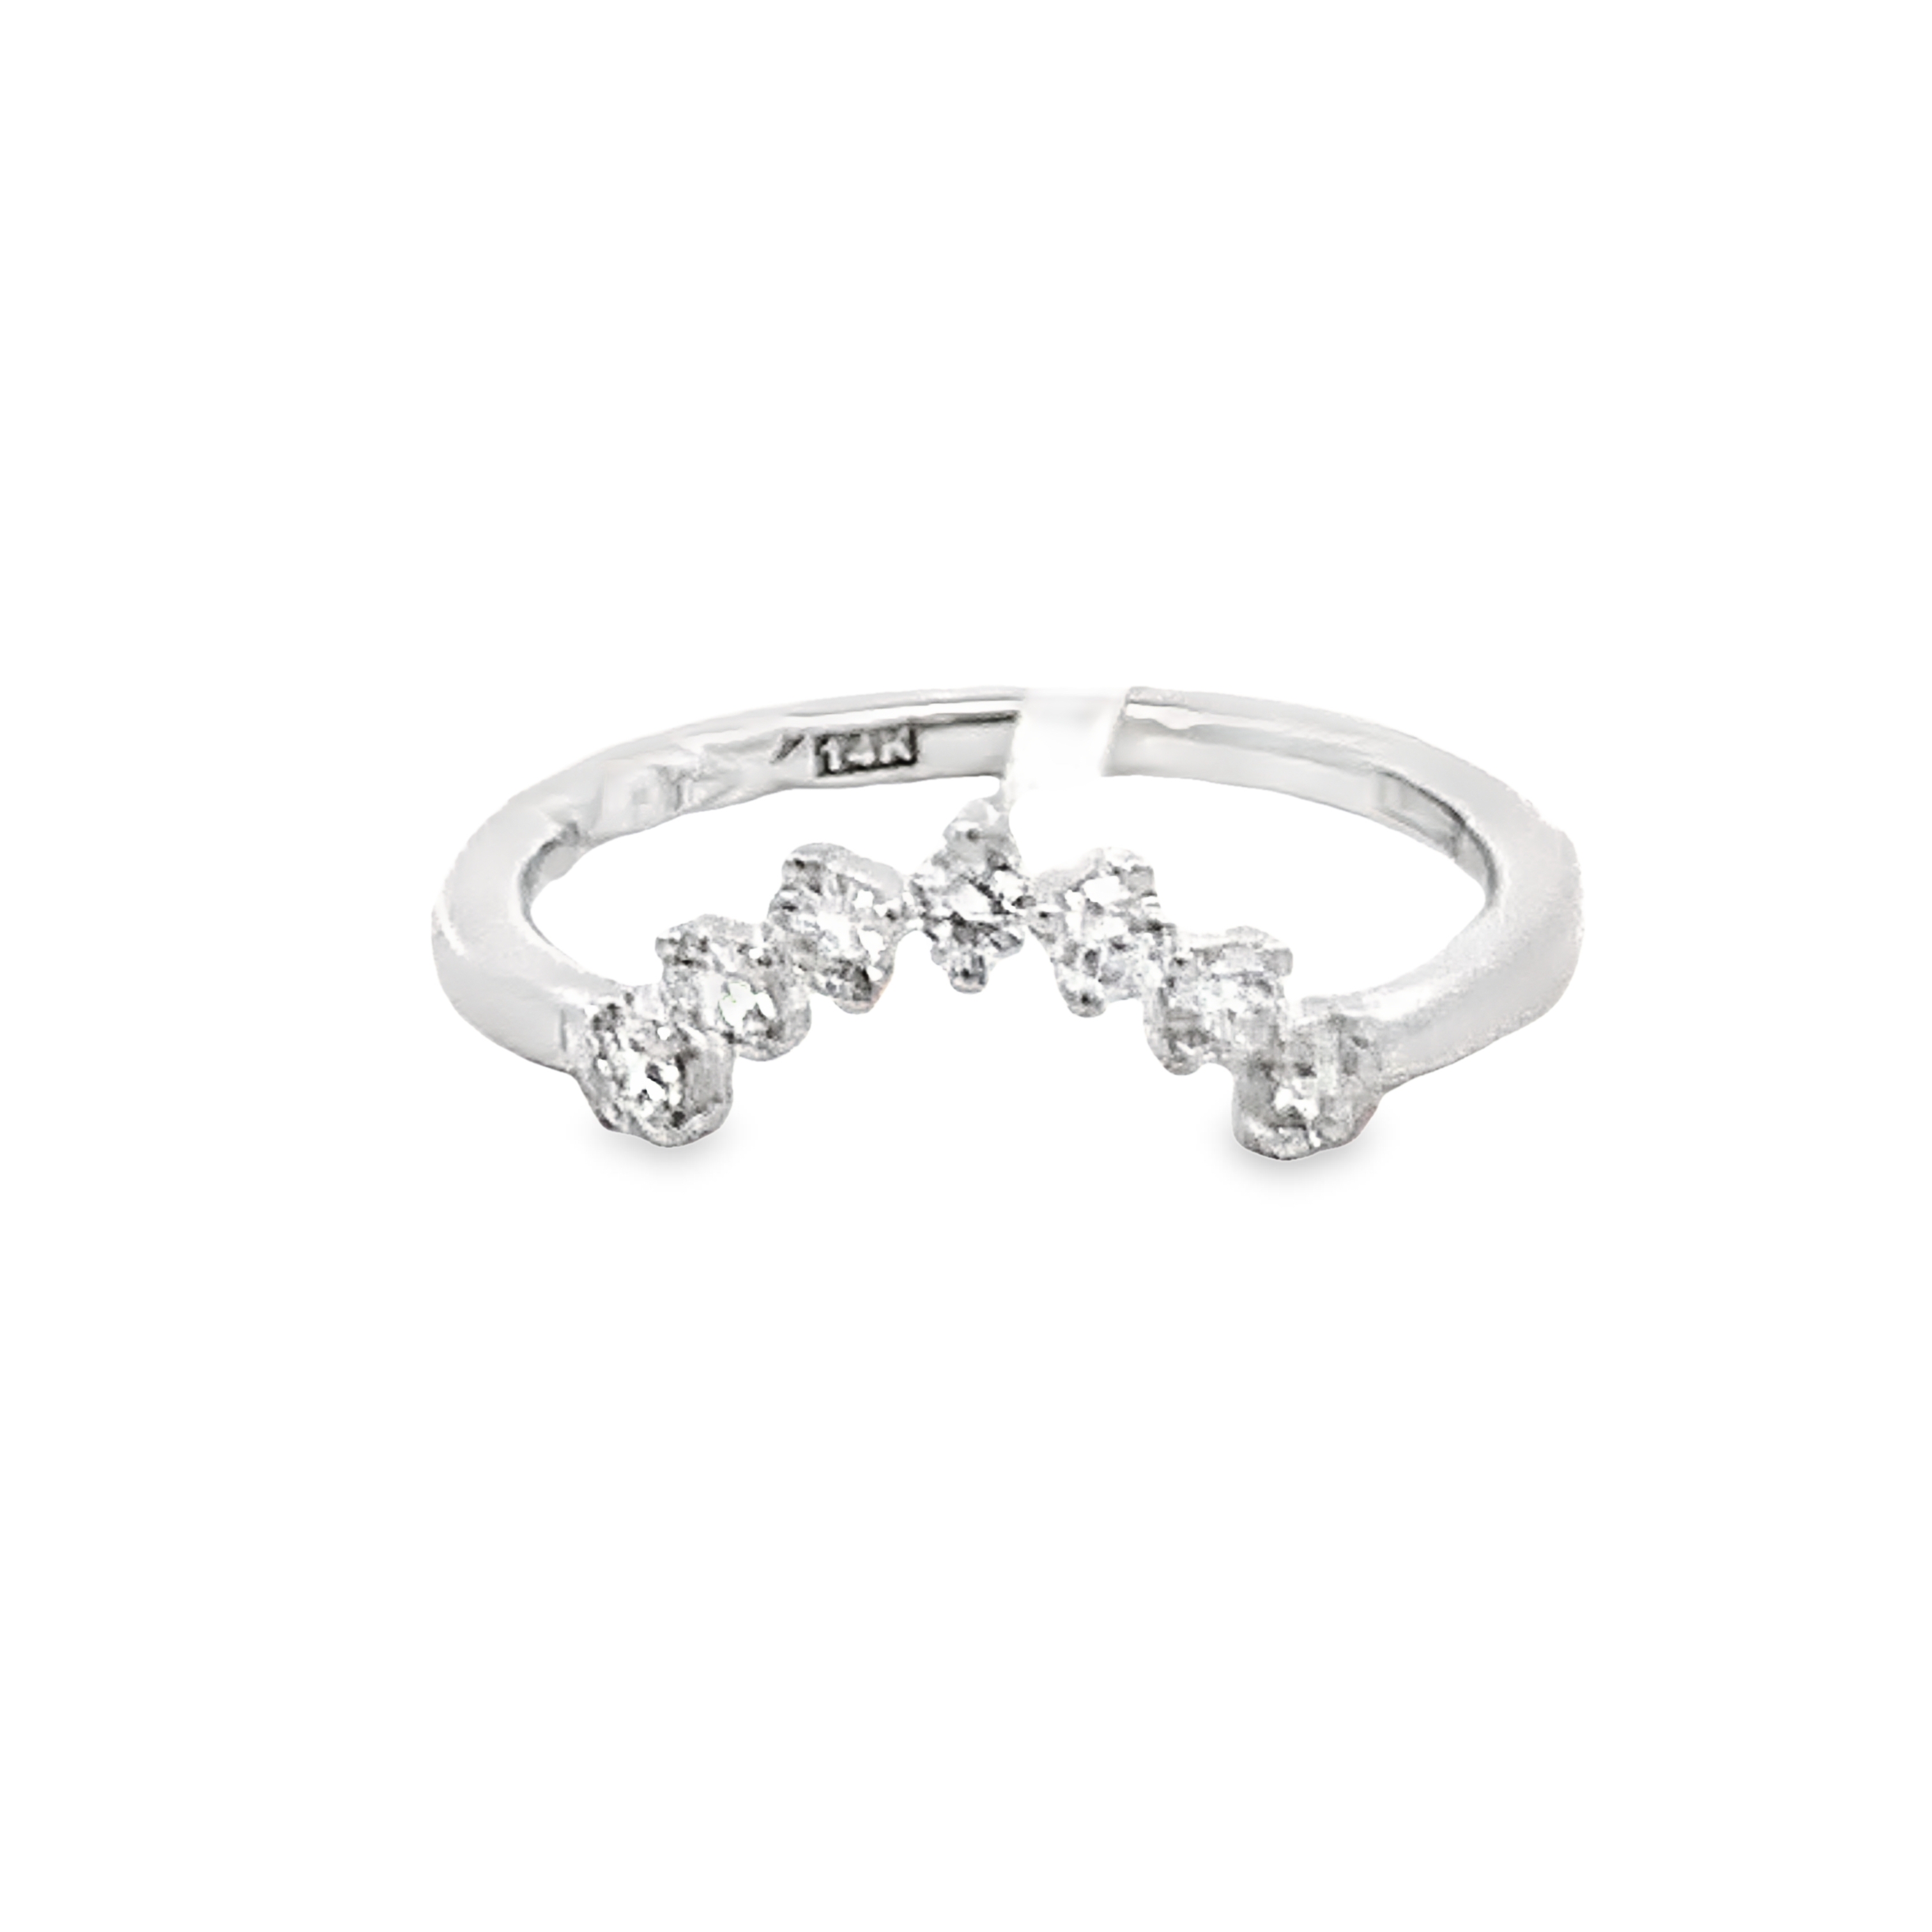 A. Jaffe 14K White Gold Curved Diamond Anniversary Band with 7 Round Diamonds 0.22 CTW G-H SI